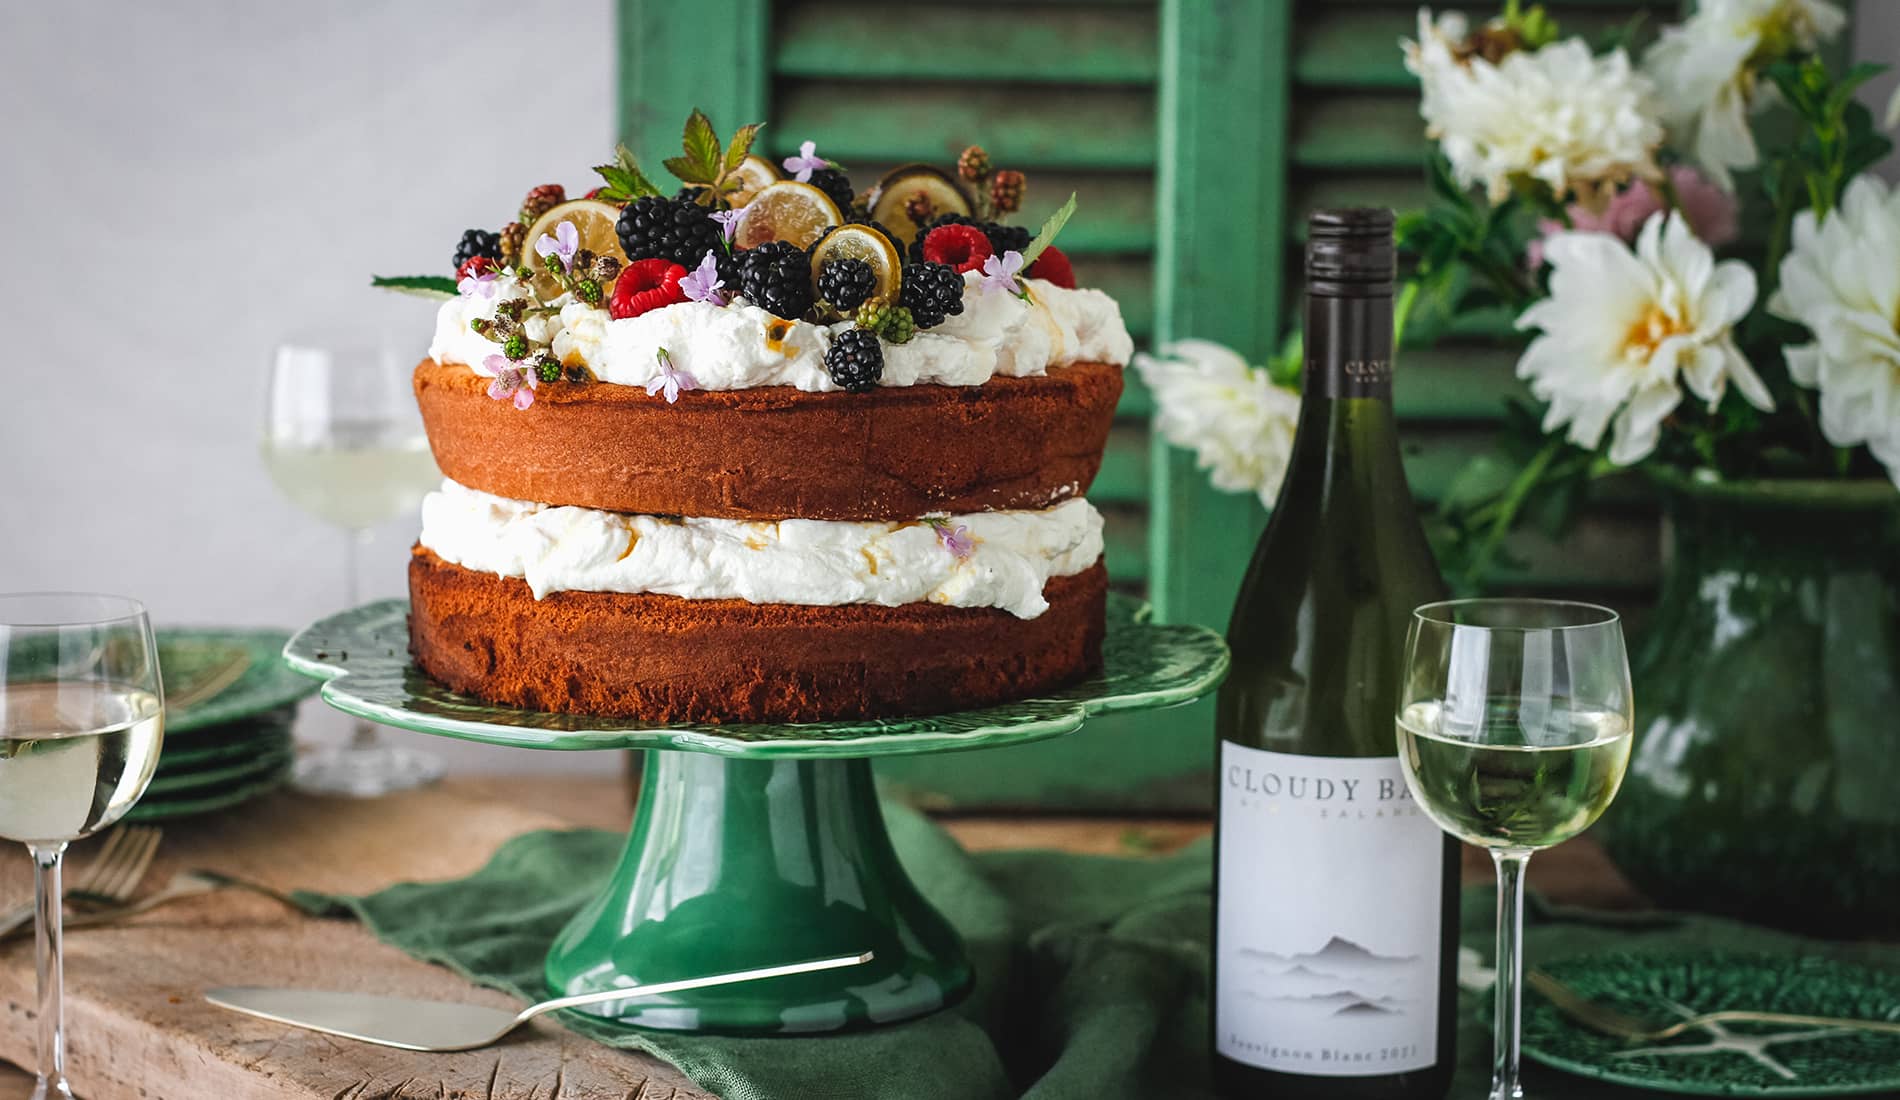 Layered cake beside bottle and glass of Cloudy Bay Sauvignon Blanc